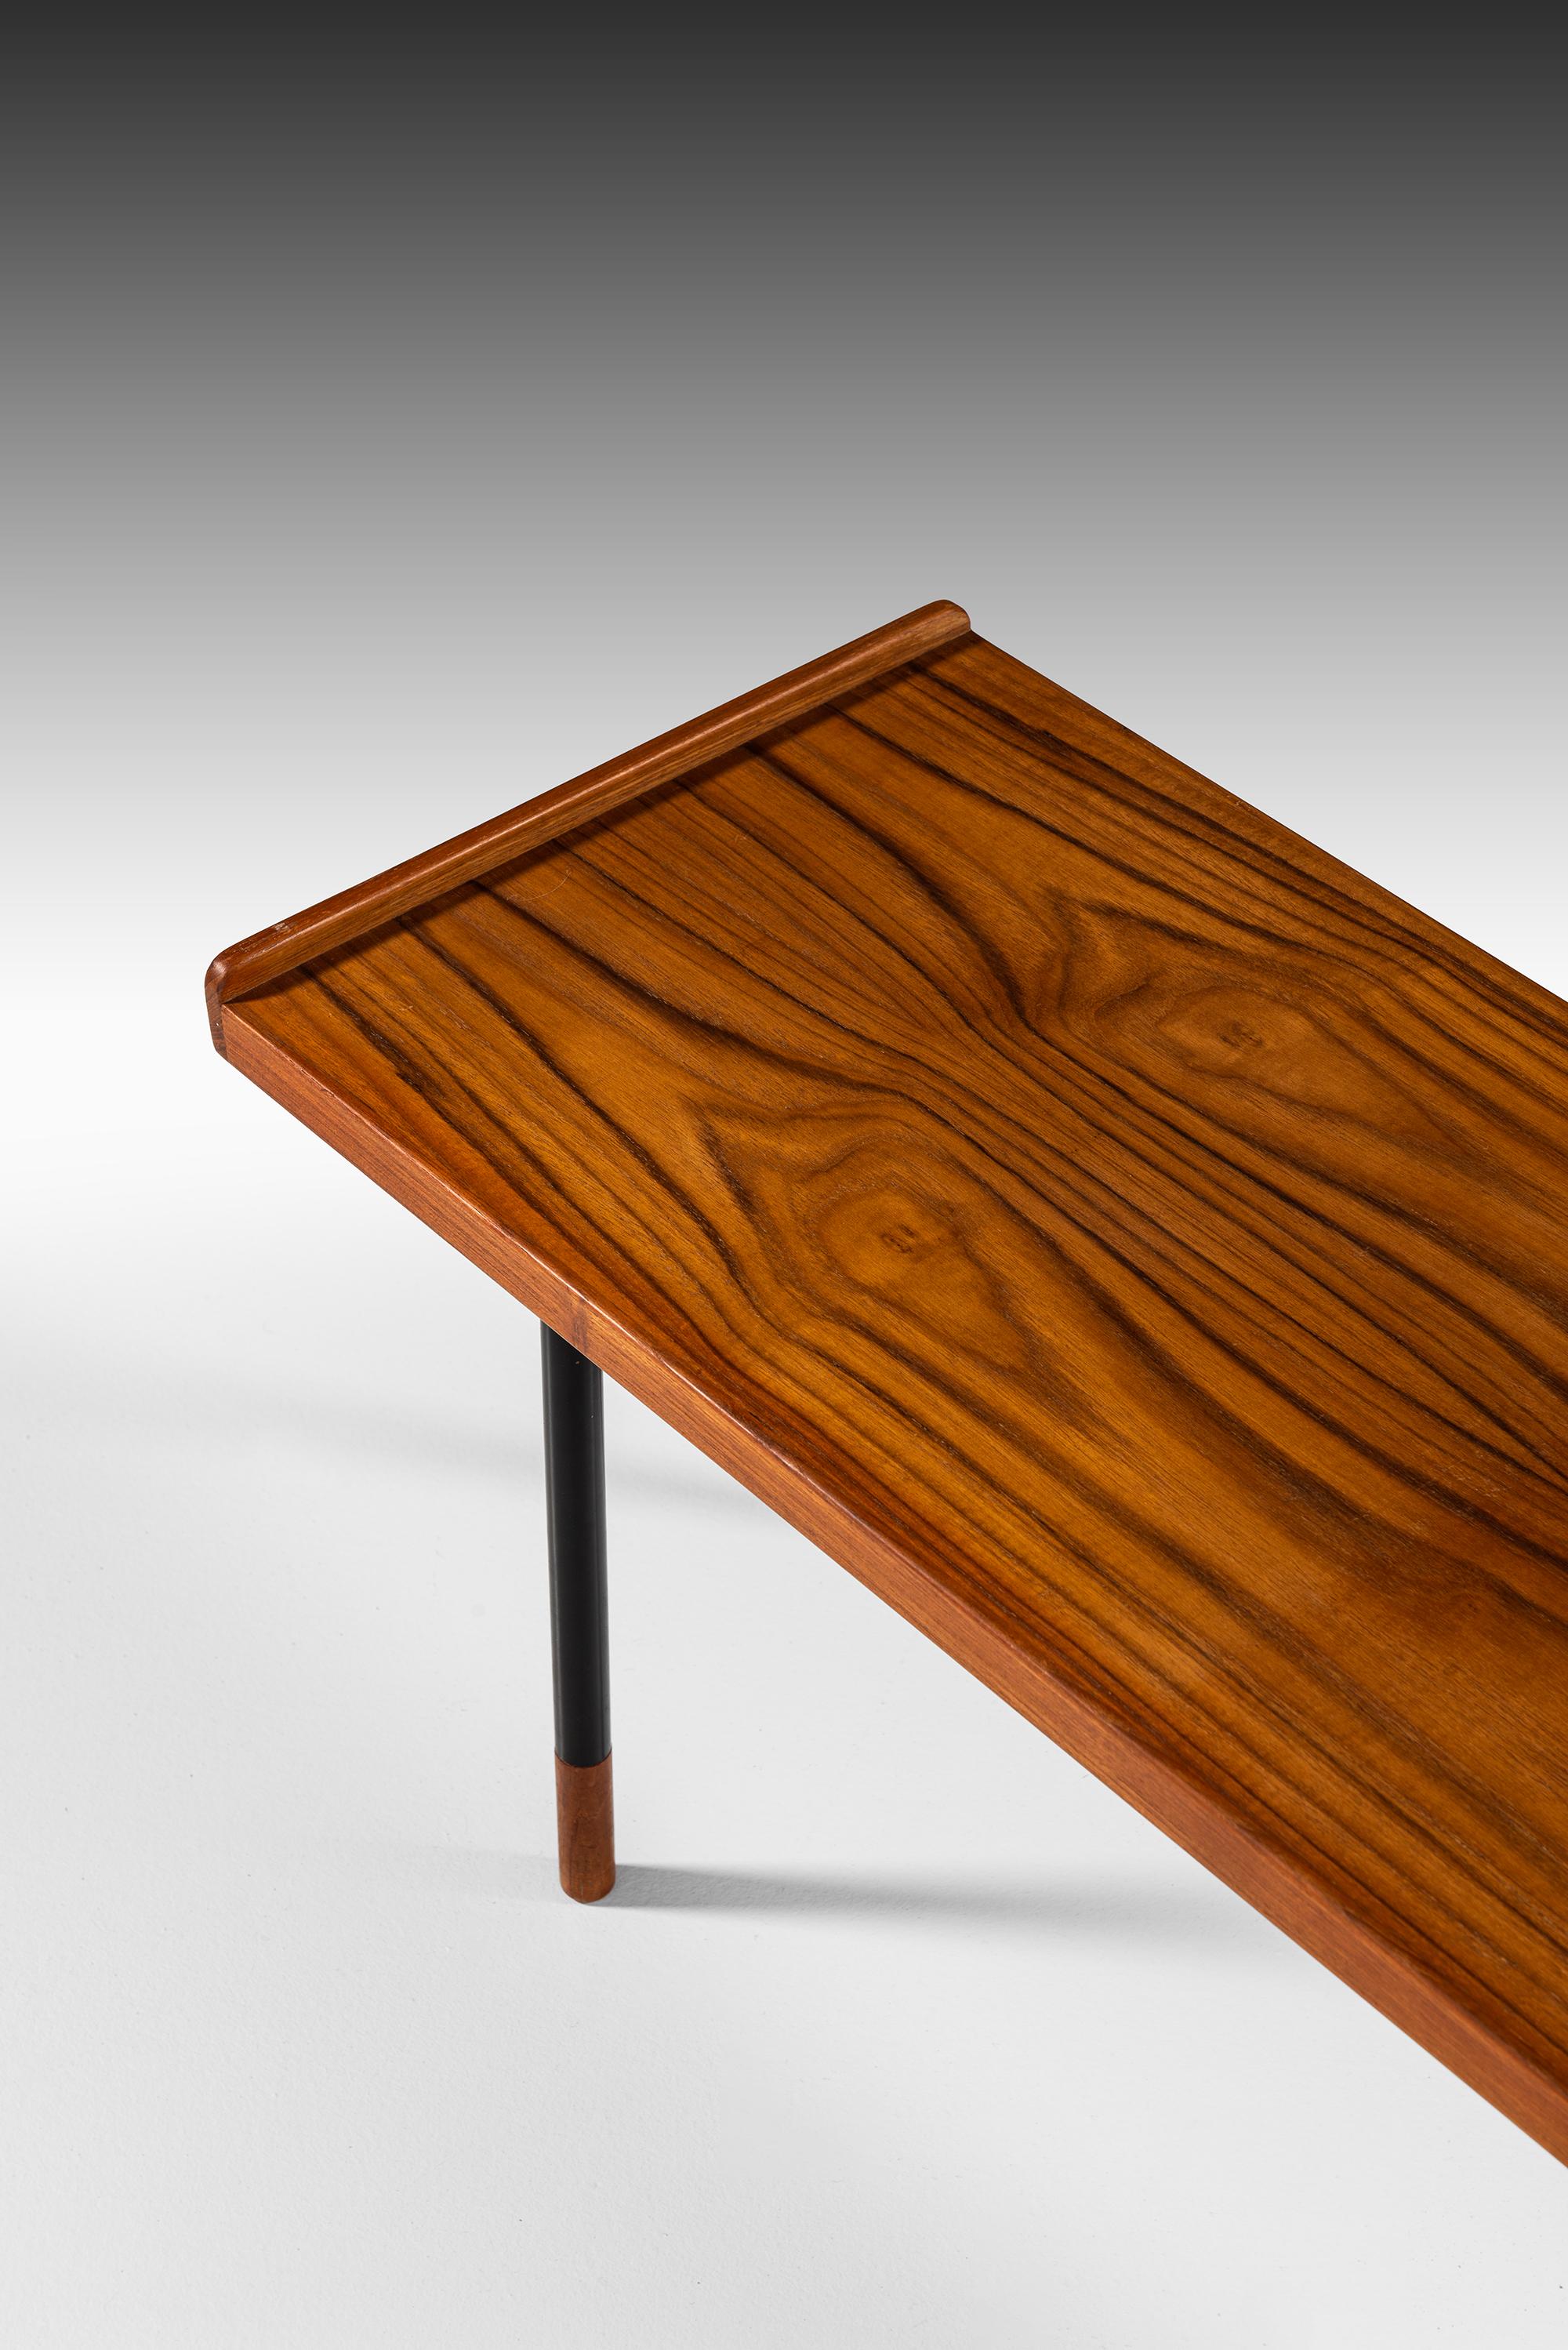 Rare coffee table / side table designed by Kurt Østervig. Produced by Jason møbler in Denmark.